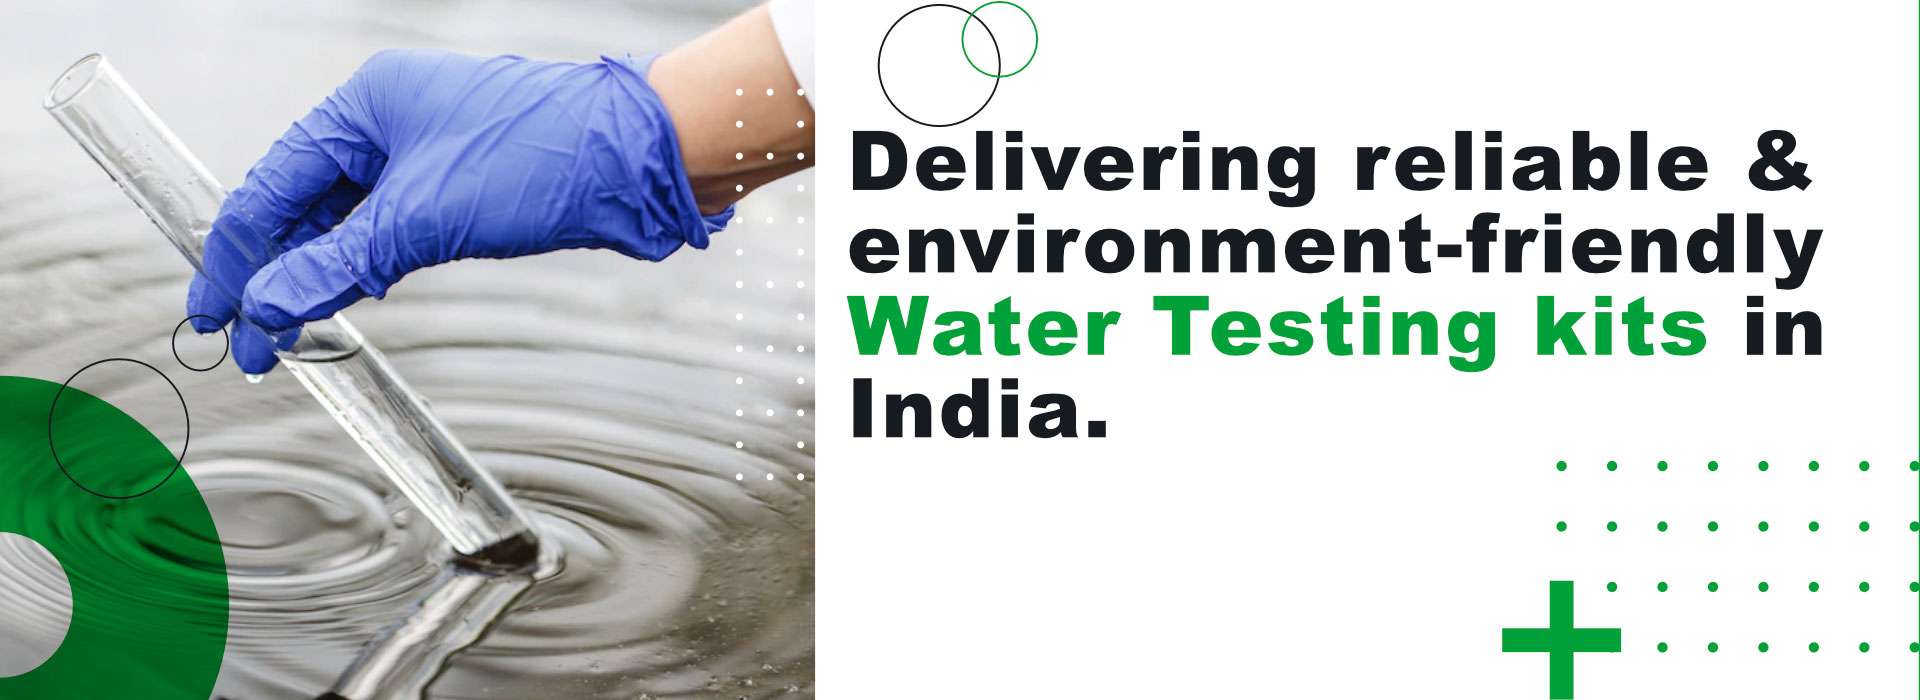  Delivering reliable & environment-friendly water Testing kits in India Manufacturers in Roorkee